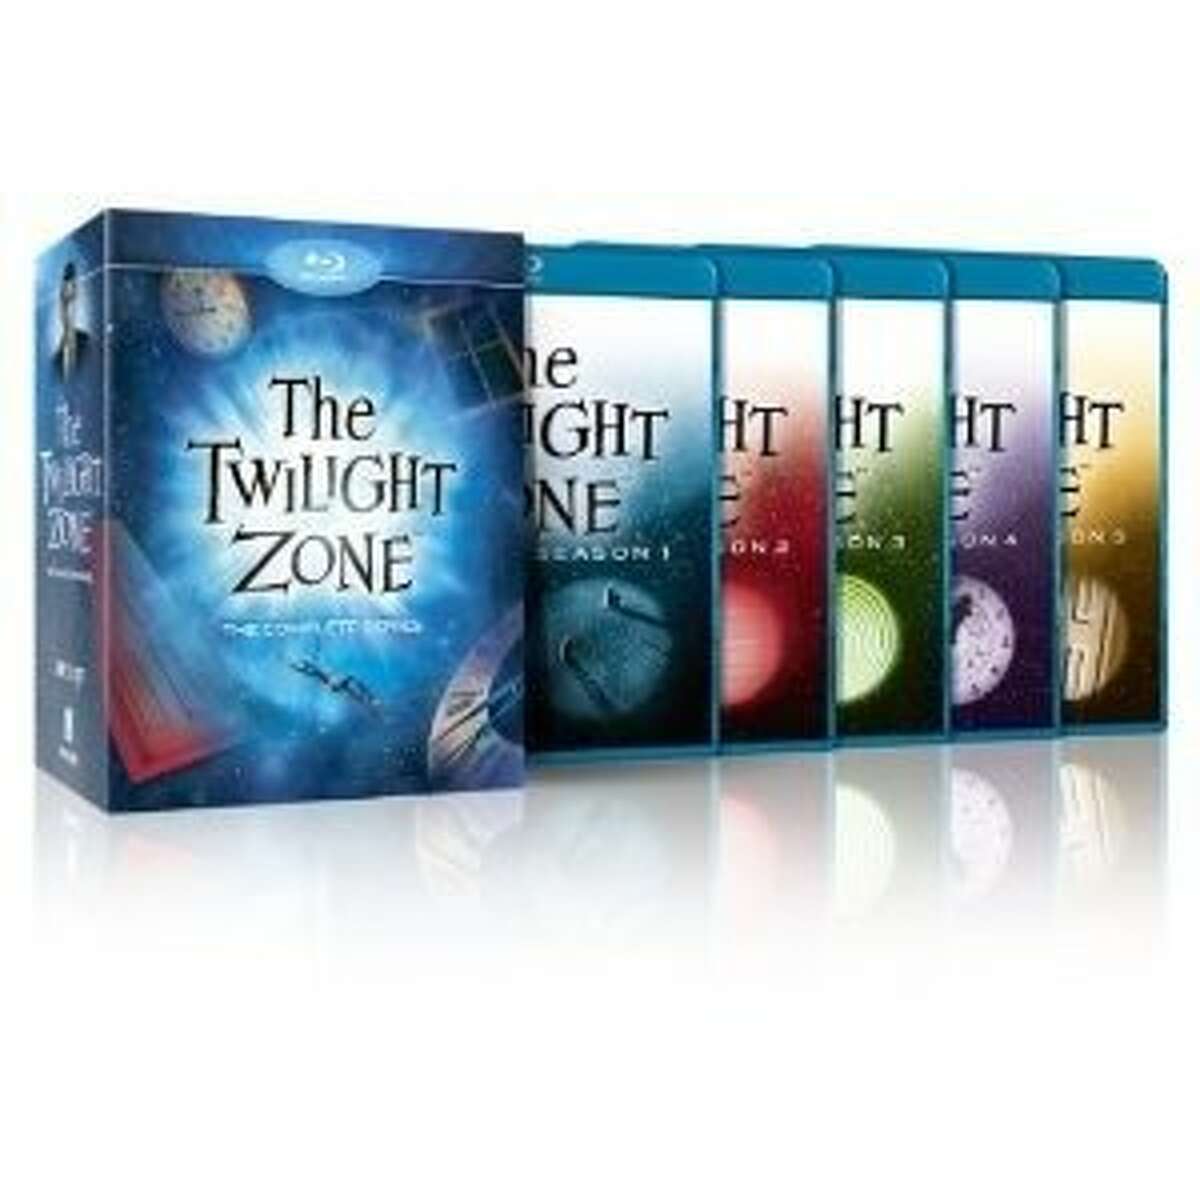 DVD review: 'Twilight Zone': Complete Series